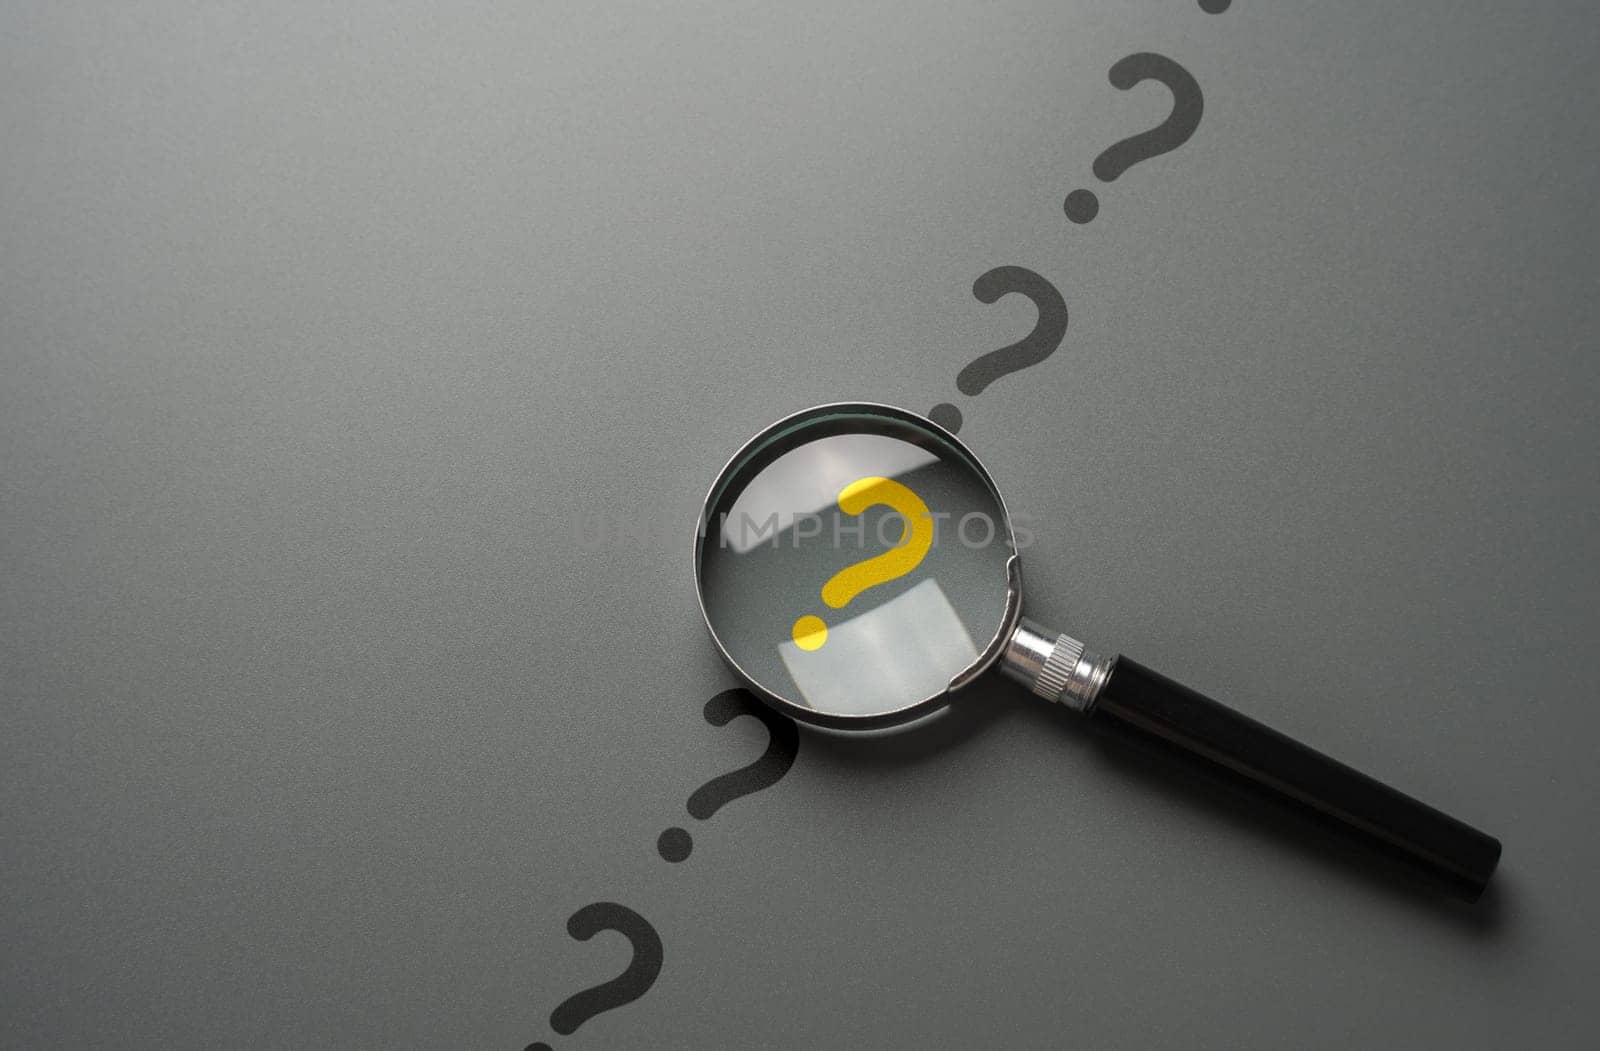 Magnifying glass and yellow question mark. FAQ. Solving mysteries, uncovering hidden truths. Curiosity, inquiry, uncertainty. Search for answers, clarity understanding. Quest for knowledge solutions by iLixe48